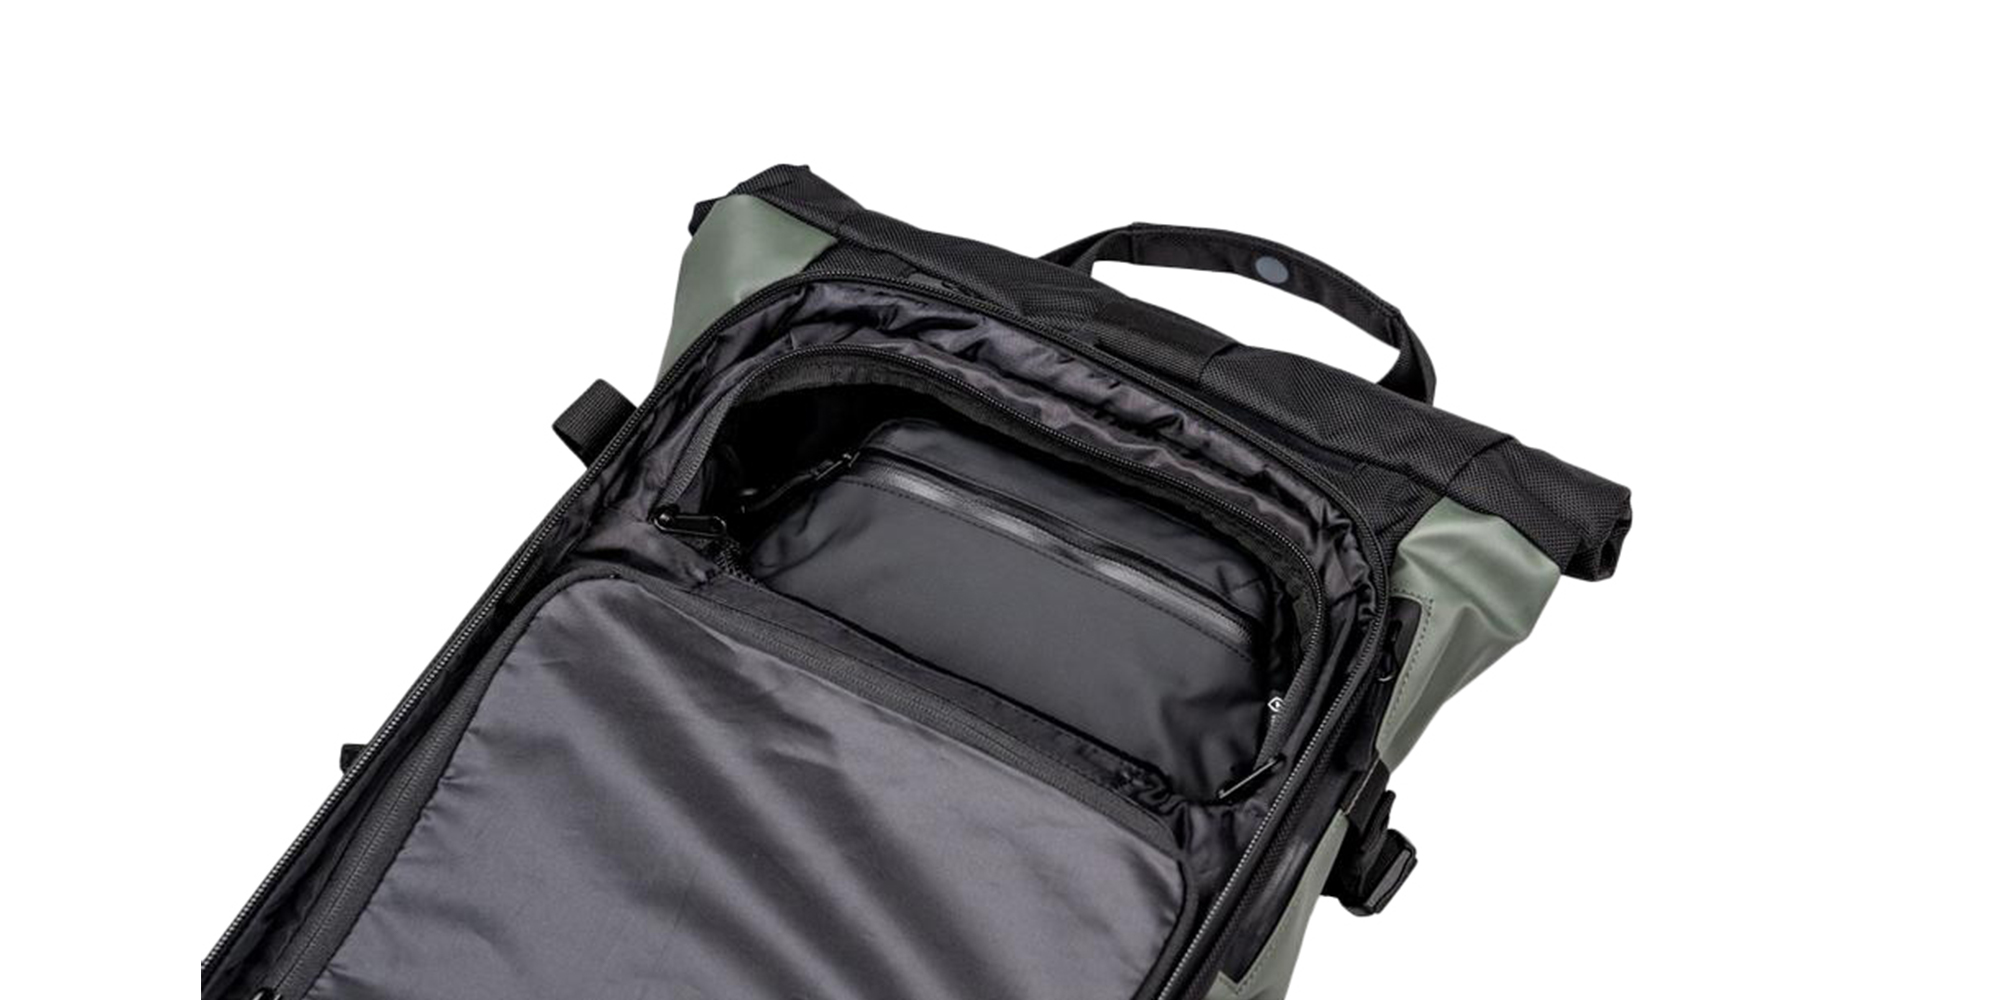 Wandrd Tech Pouch Medium in the Prvke backpack compartment